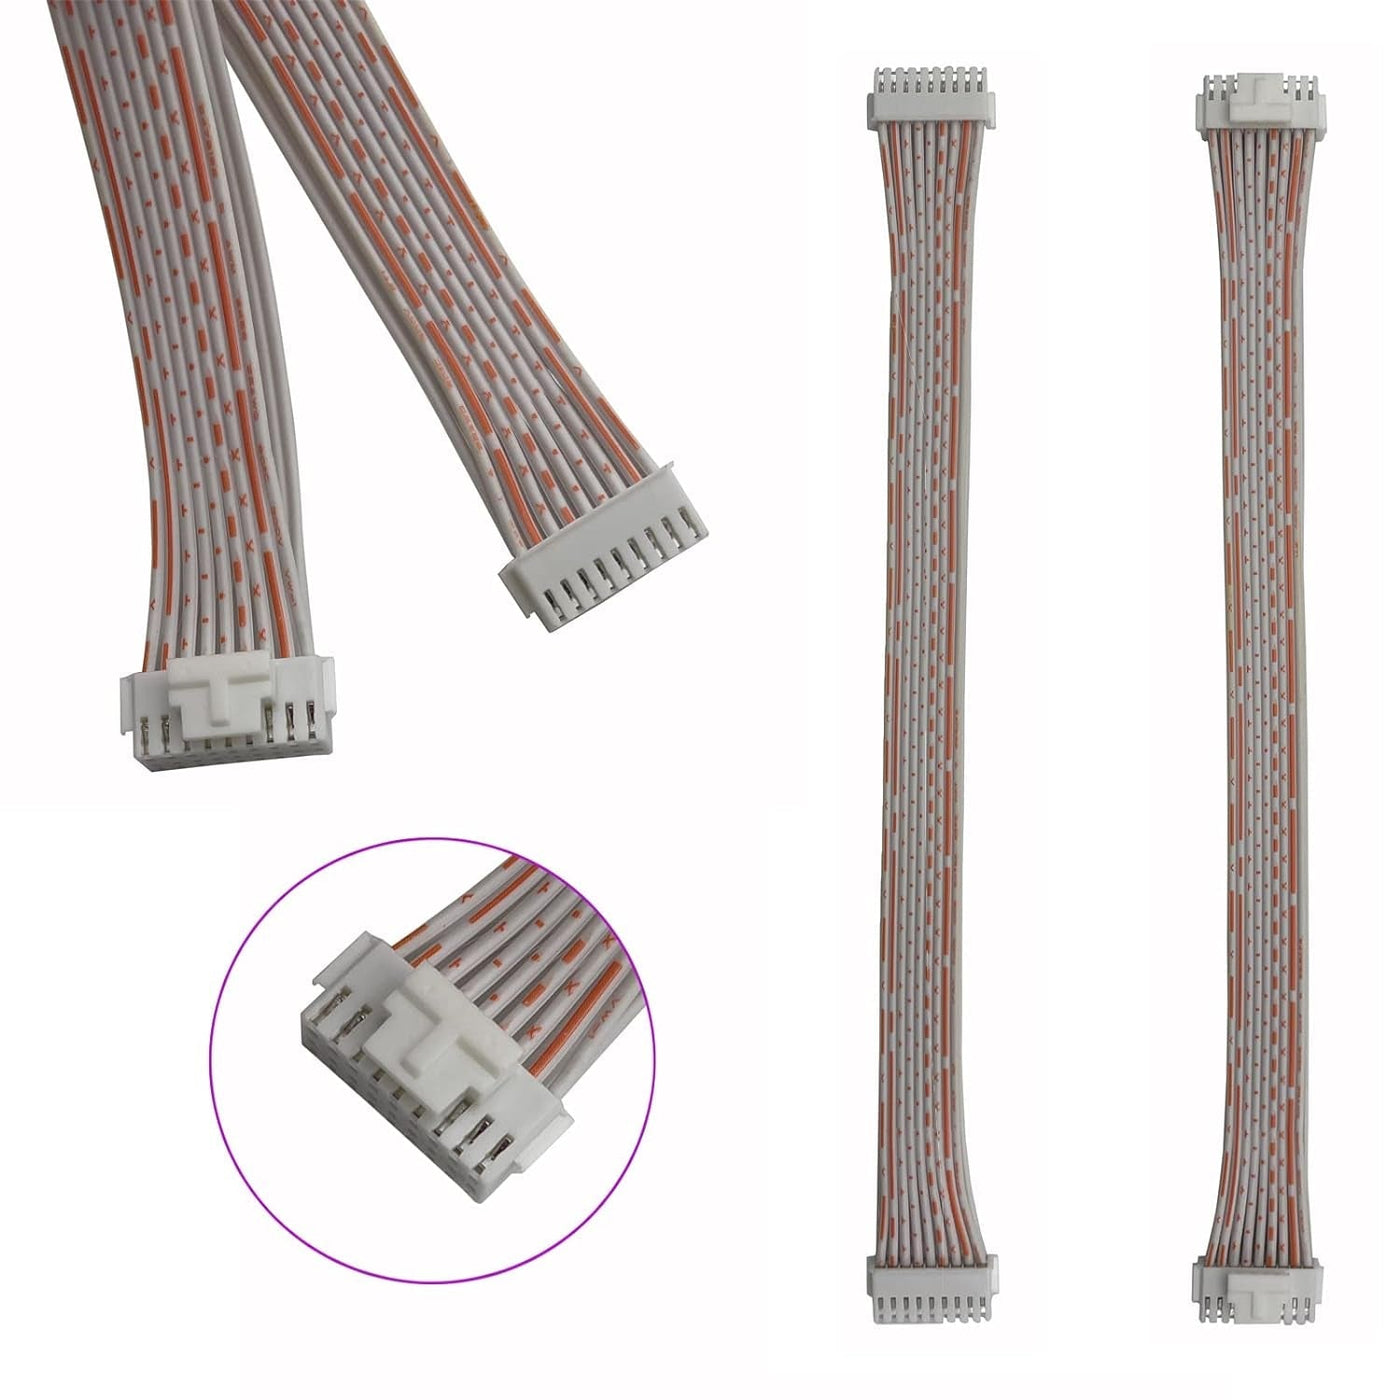 8Pcs/Set 18 Pin Signal Cable 2X9 Pins Miner Connect Date Cable for Bitmain Antminer S9 S7 L3 Machine